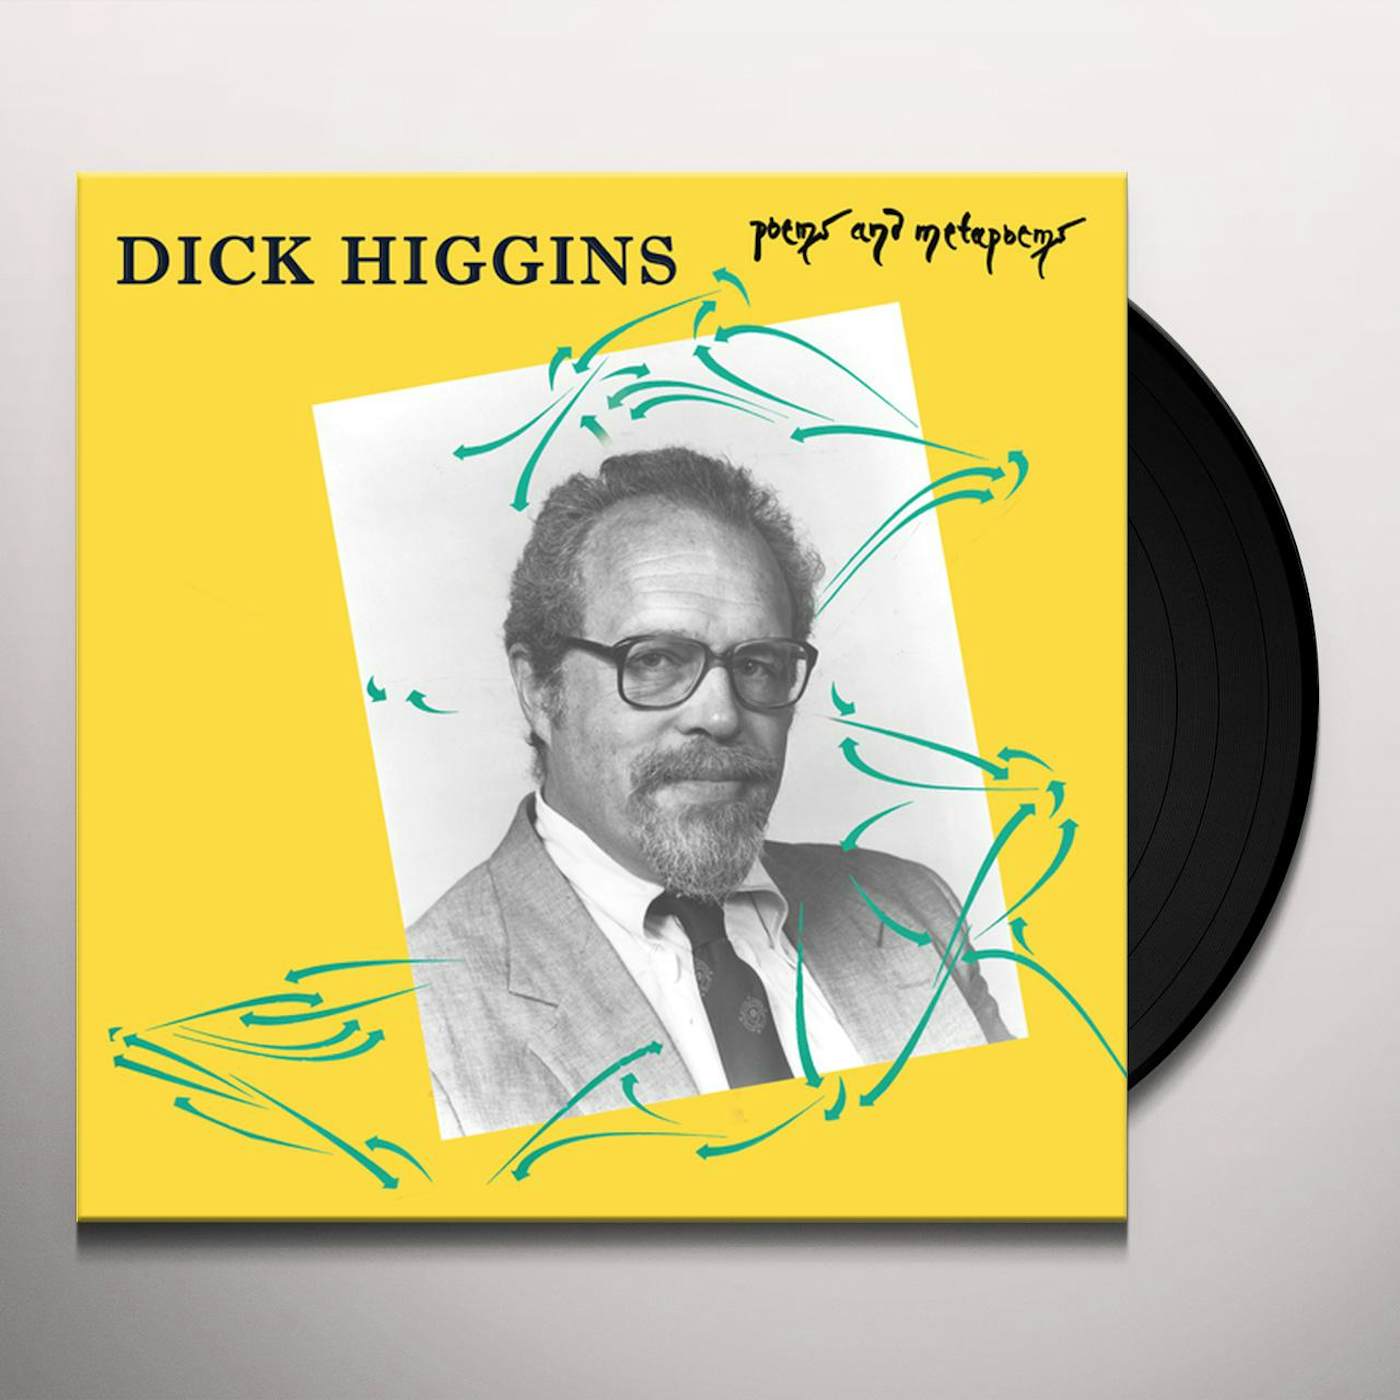 Dick Higgins Poems And Metapoems Vinyl Record